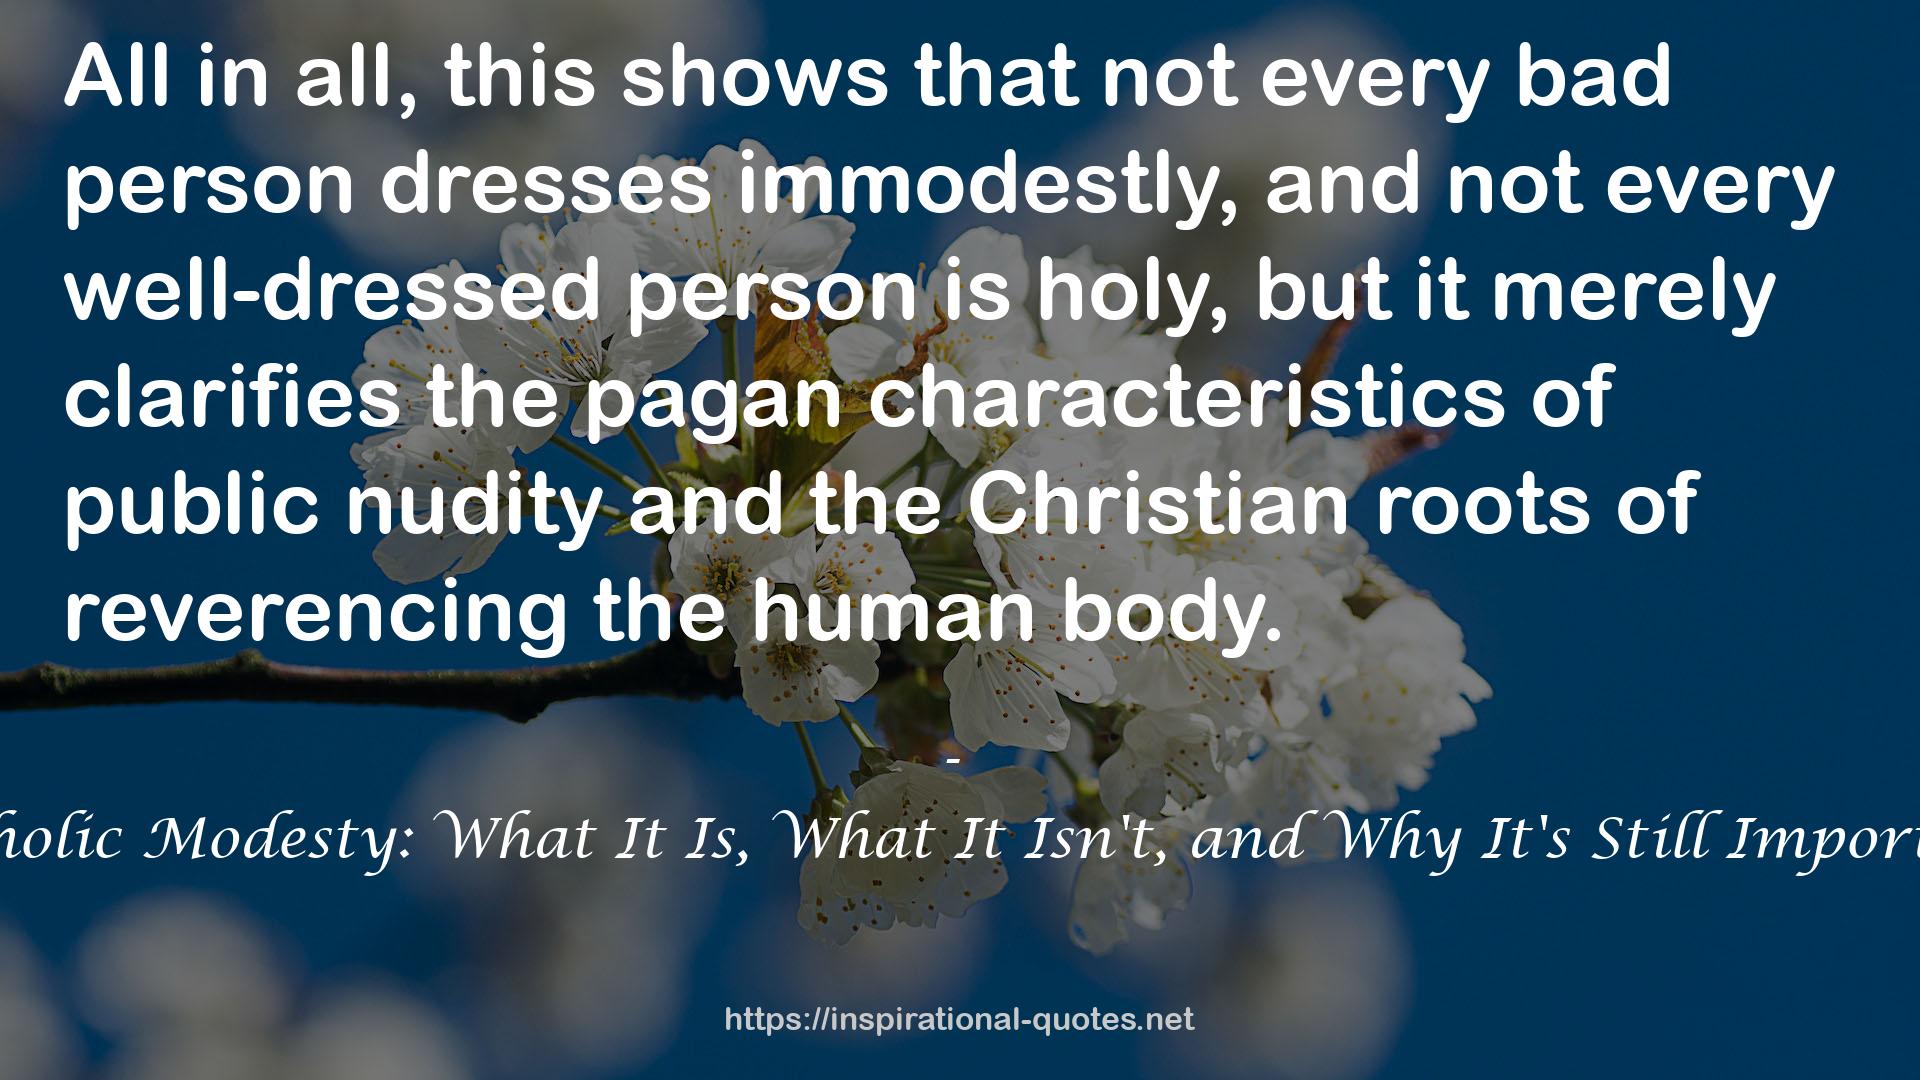 Catholic Modesty: What It Is, What It Isn't, and Why It's Still Important QUOTES